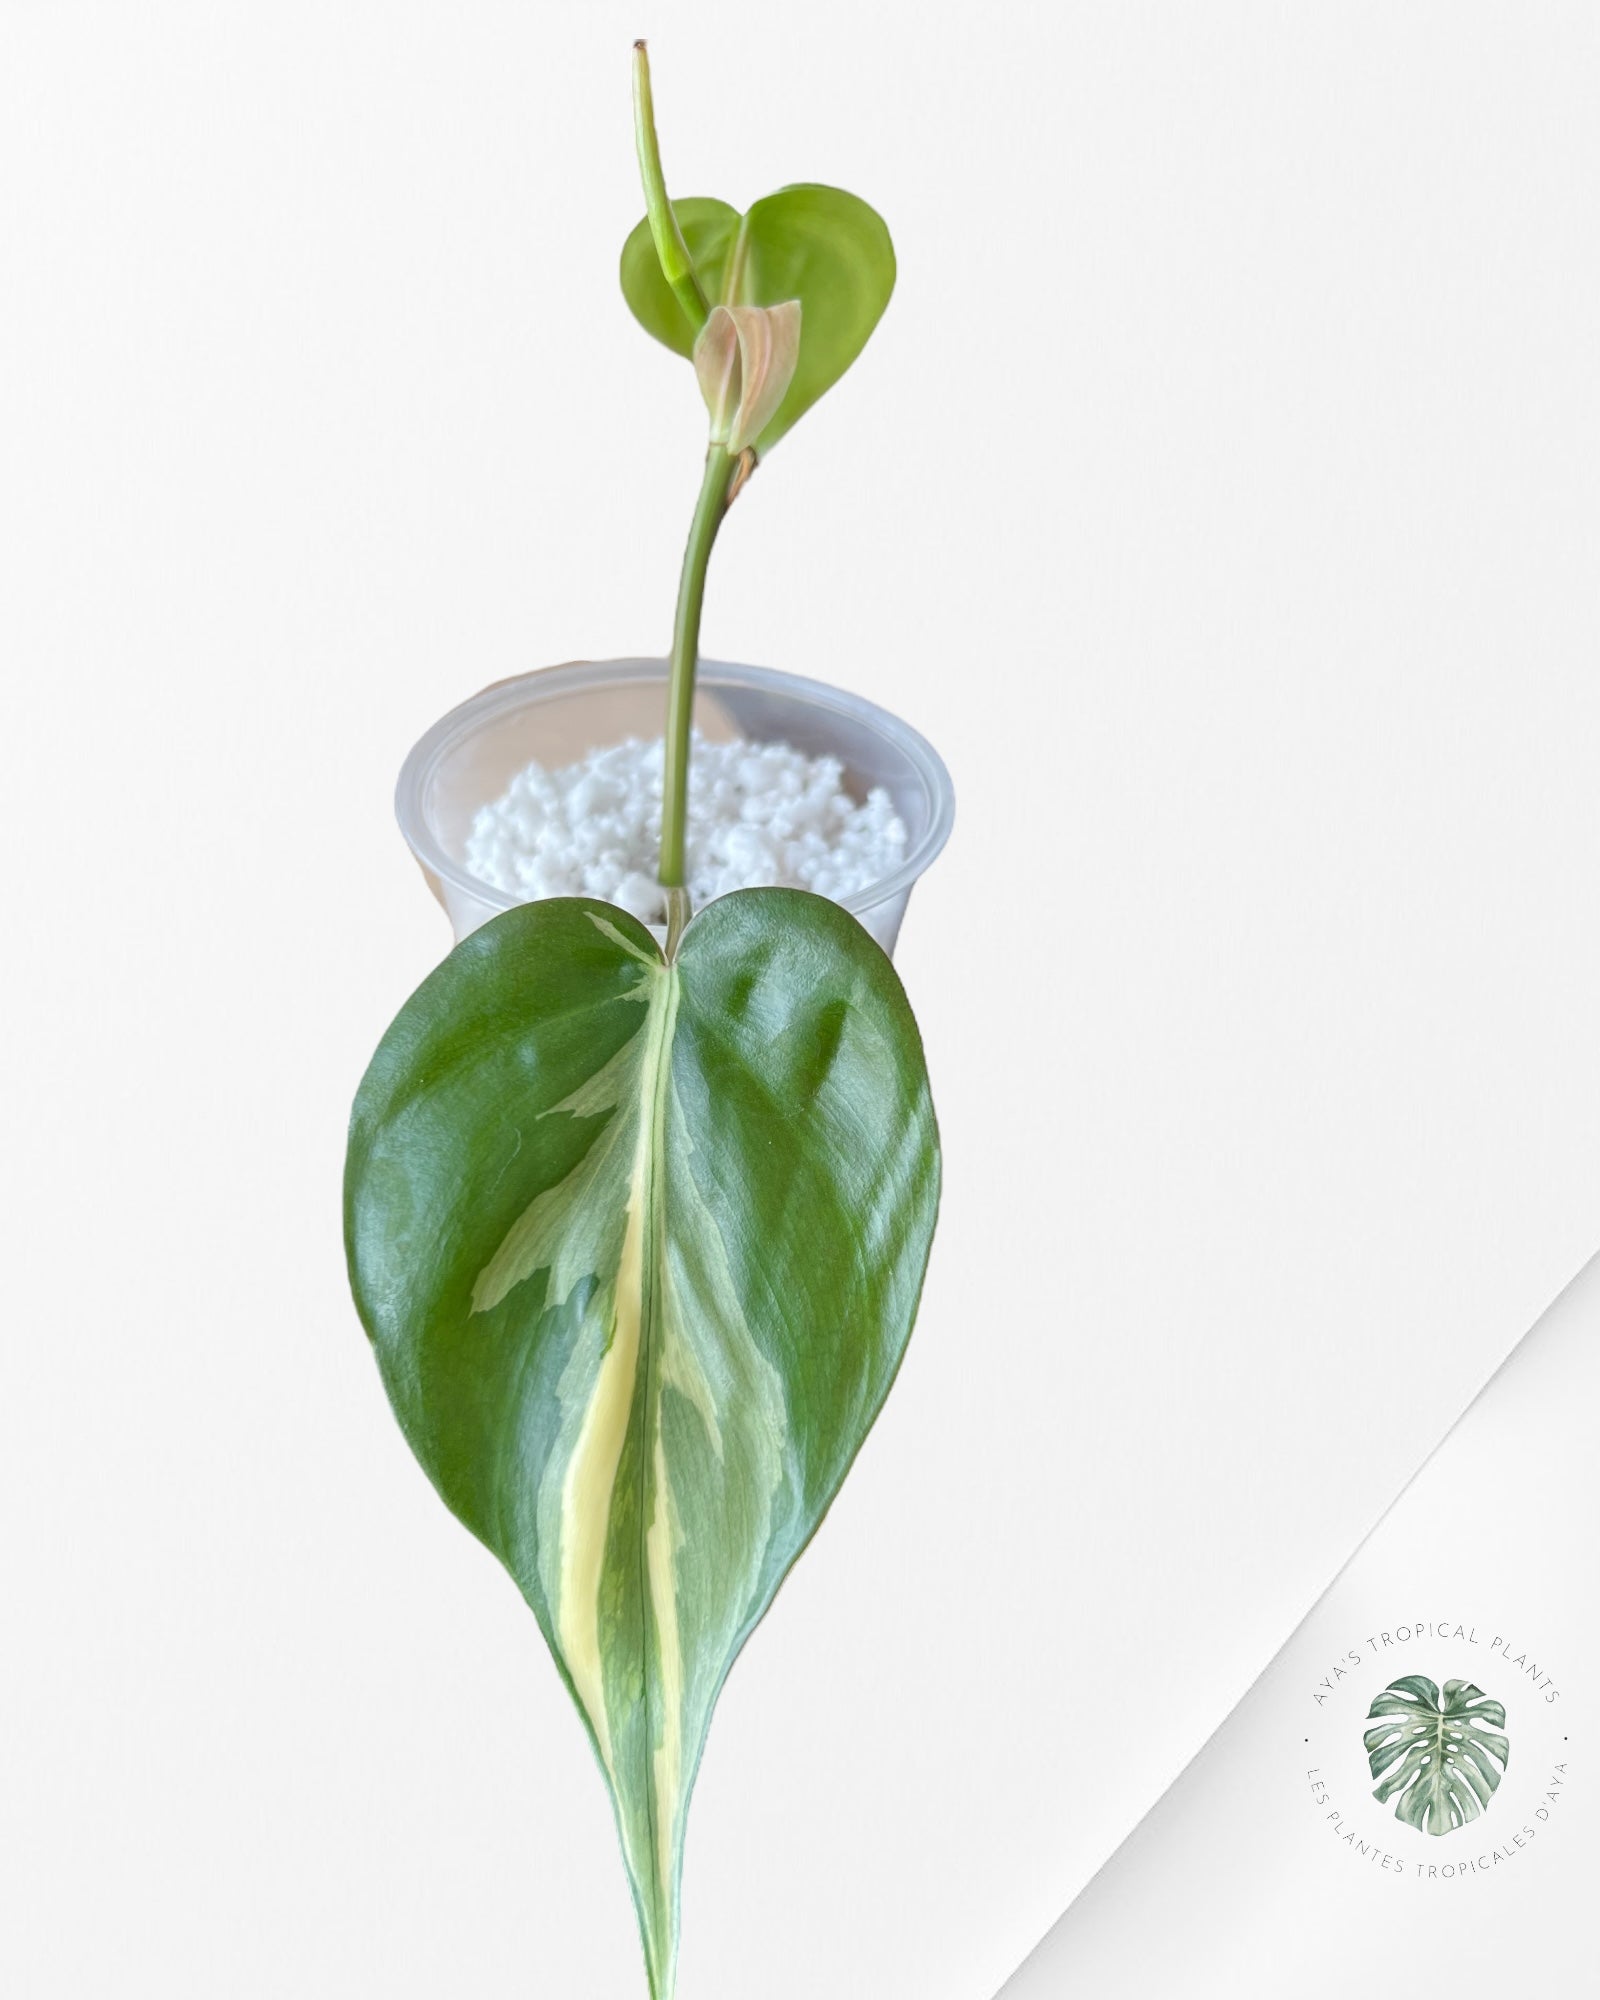 Philodendron Hederaceum 'Rio'-2222